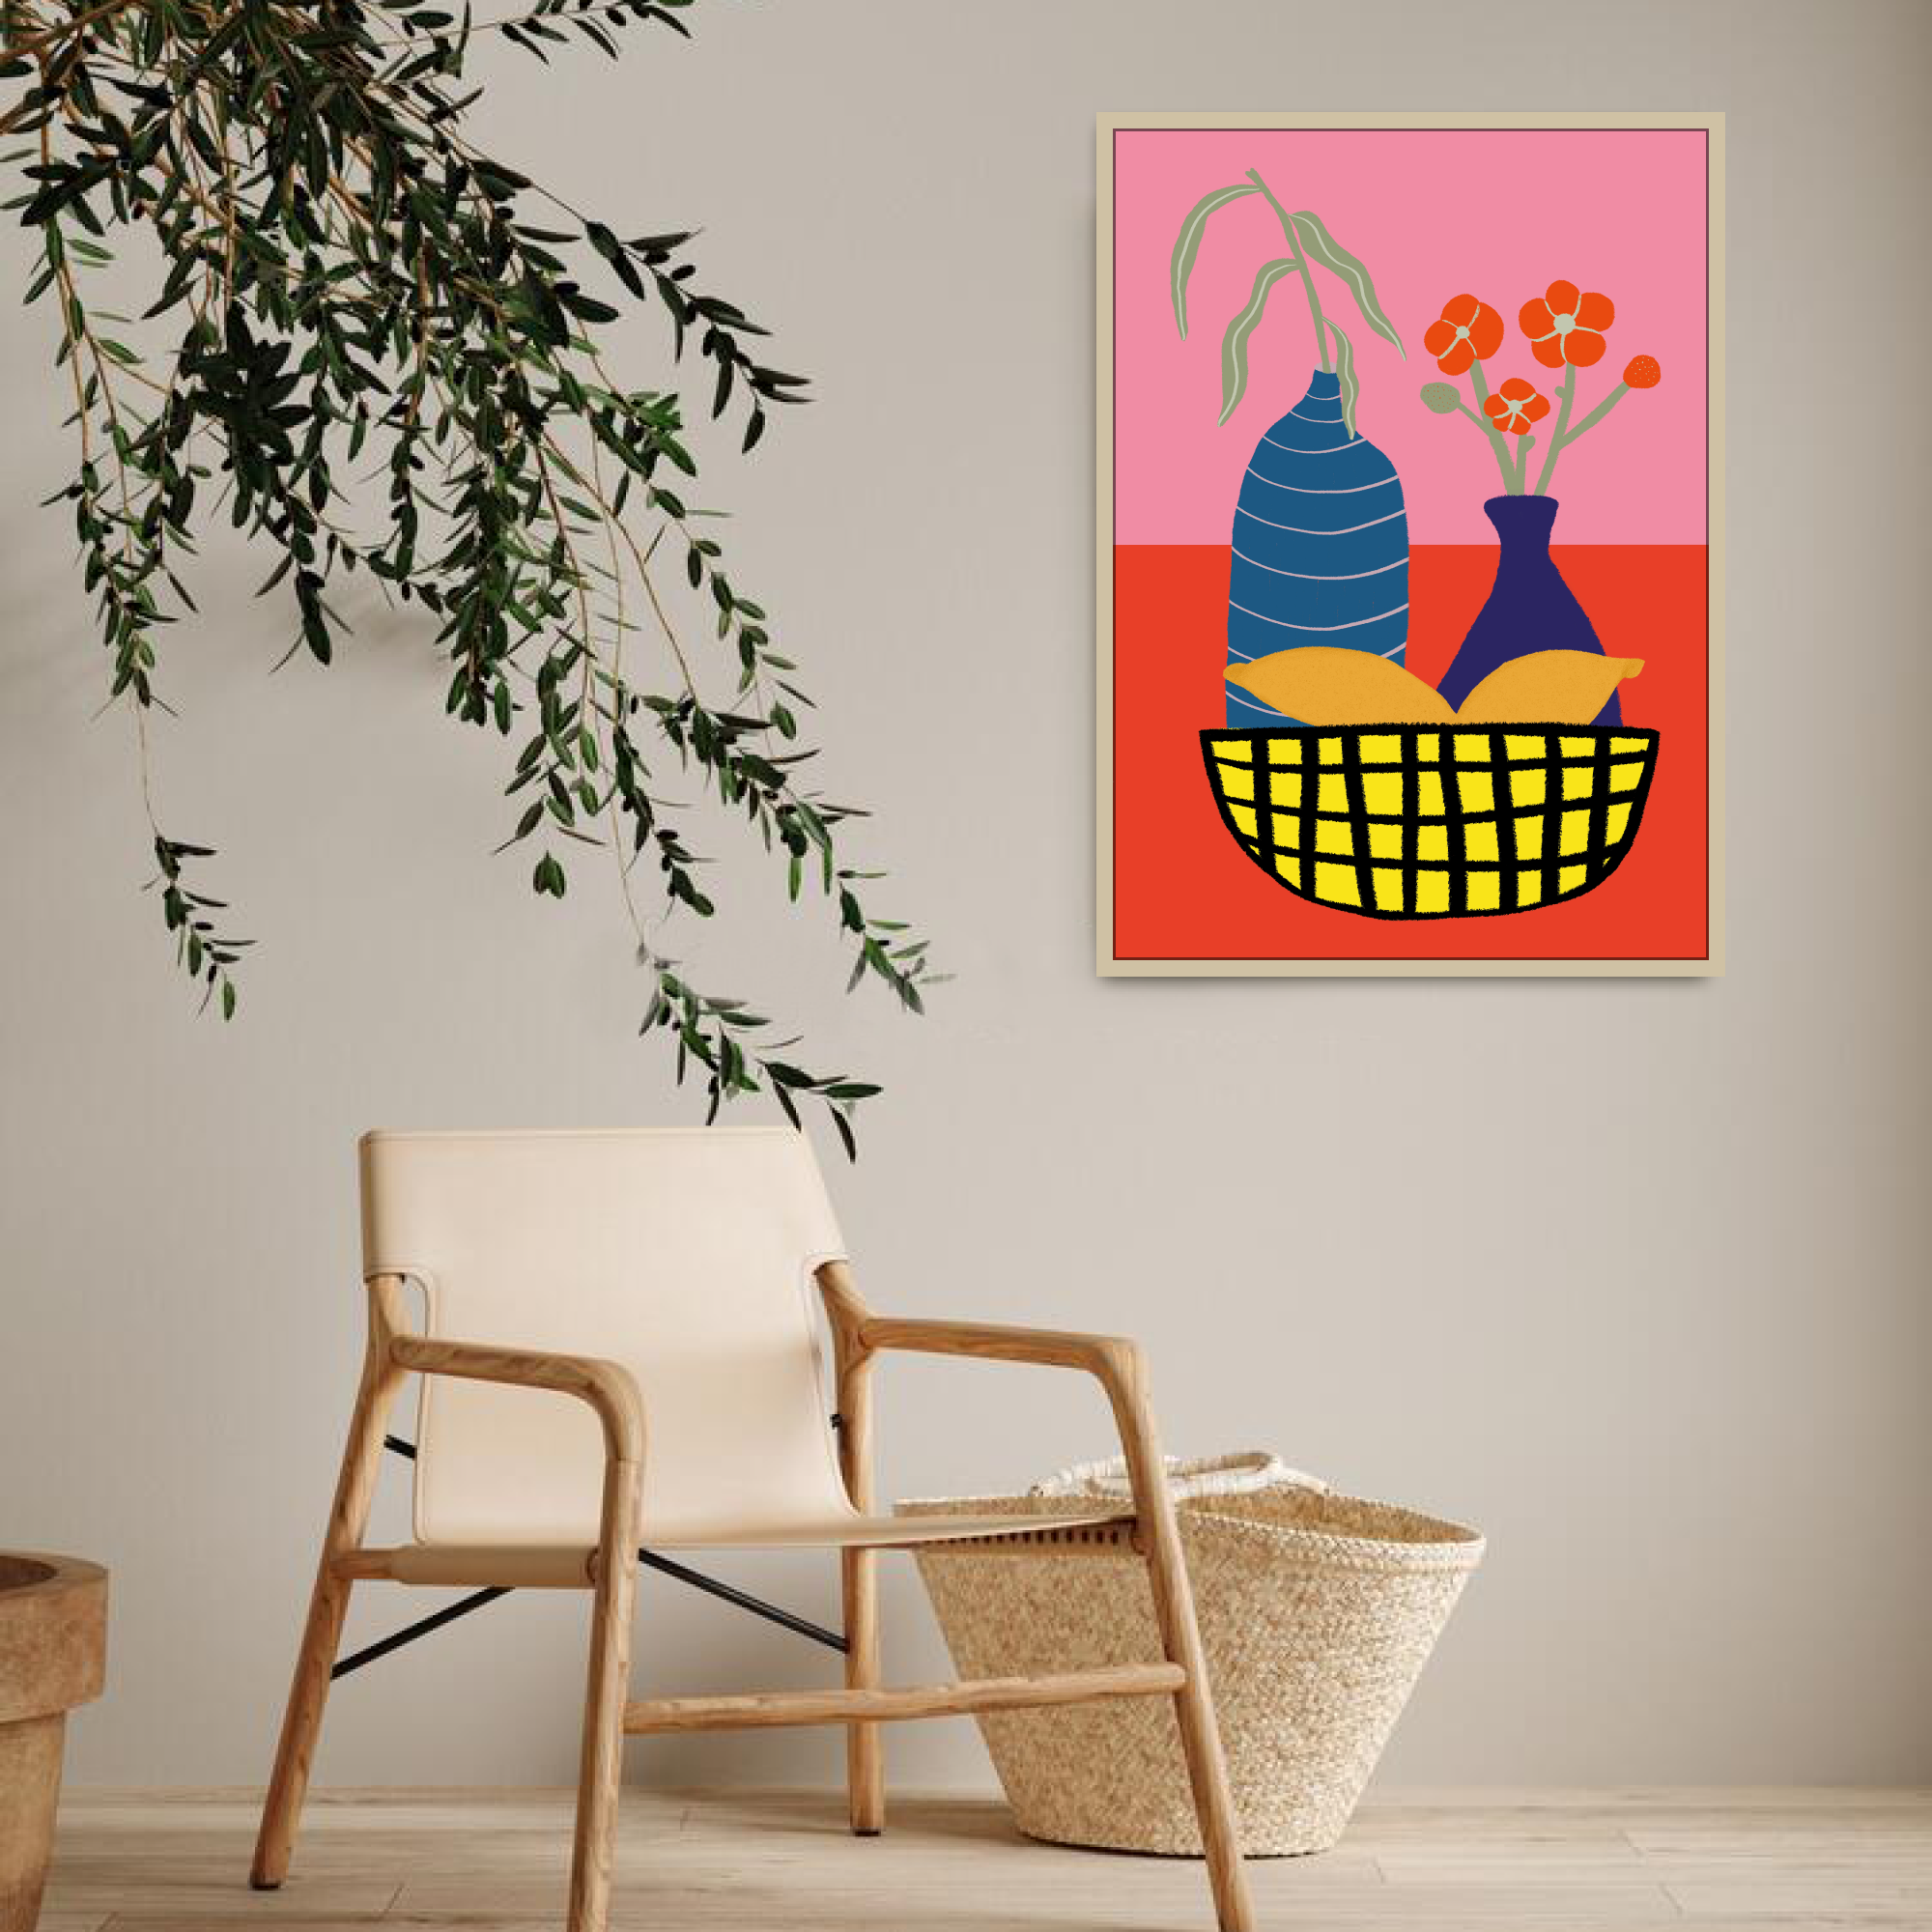 Canvas Print: "Bowl Of Happiness"